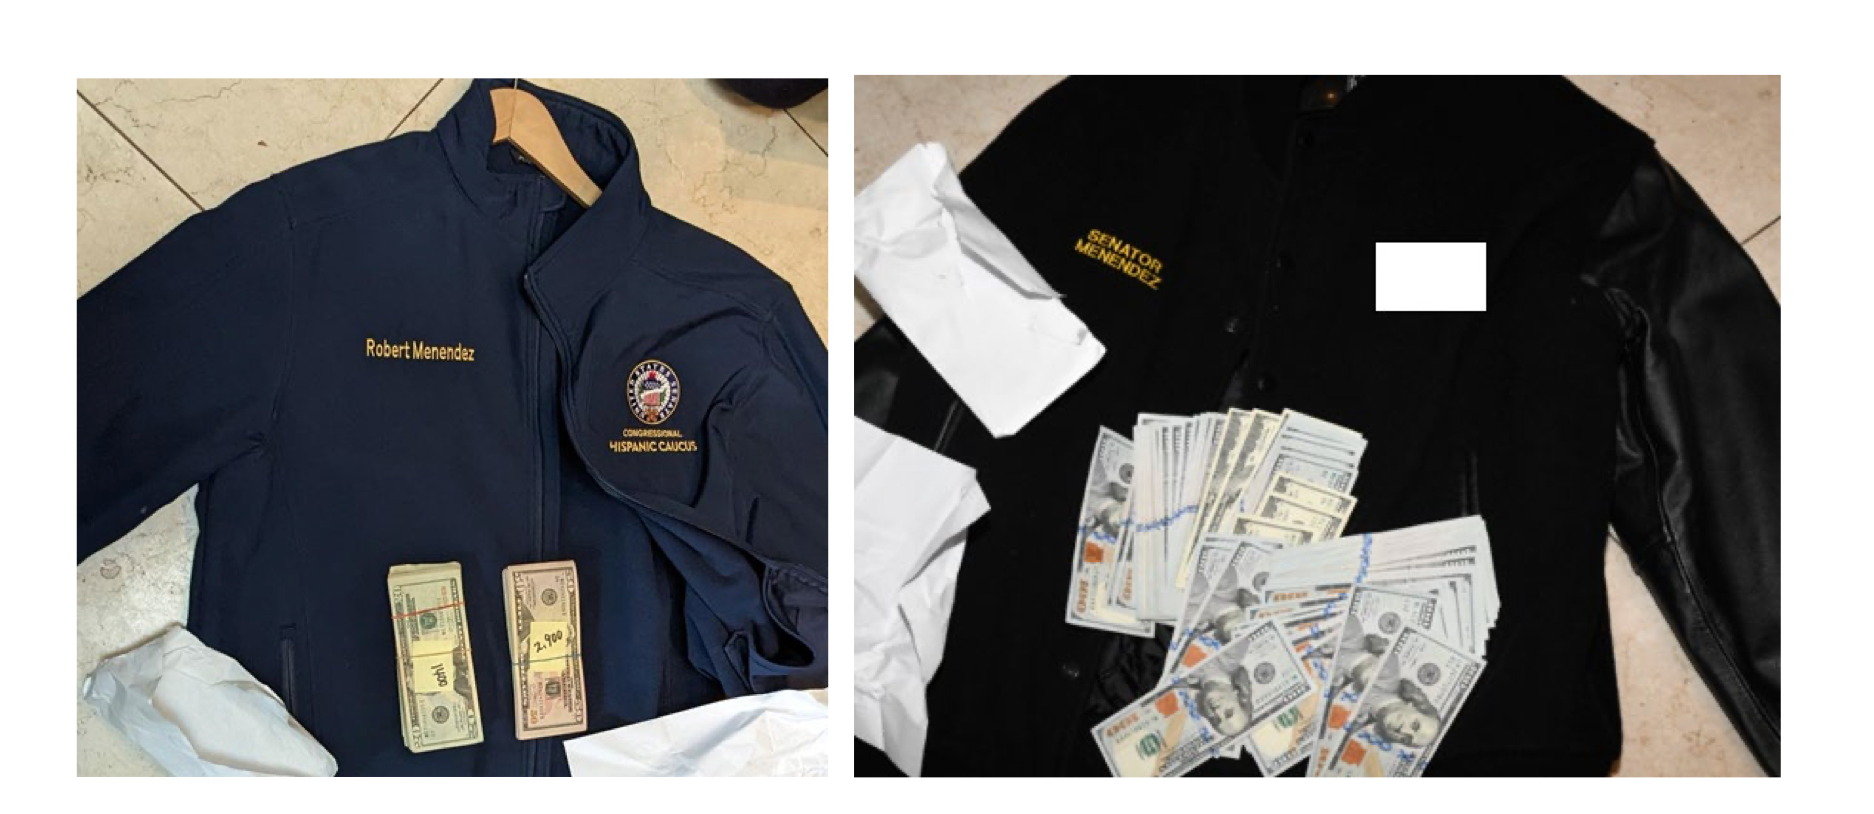 A federal indictment charging US Senator Robert Menendez with bribery and corruption includes photos of jackets bearing his name and stuffed with cash allegedly discovered by authorities.